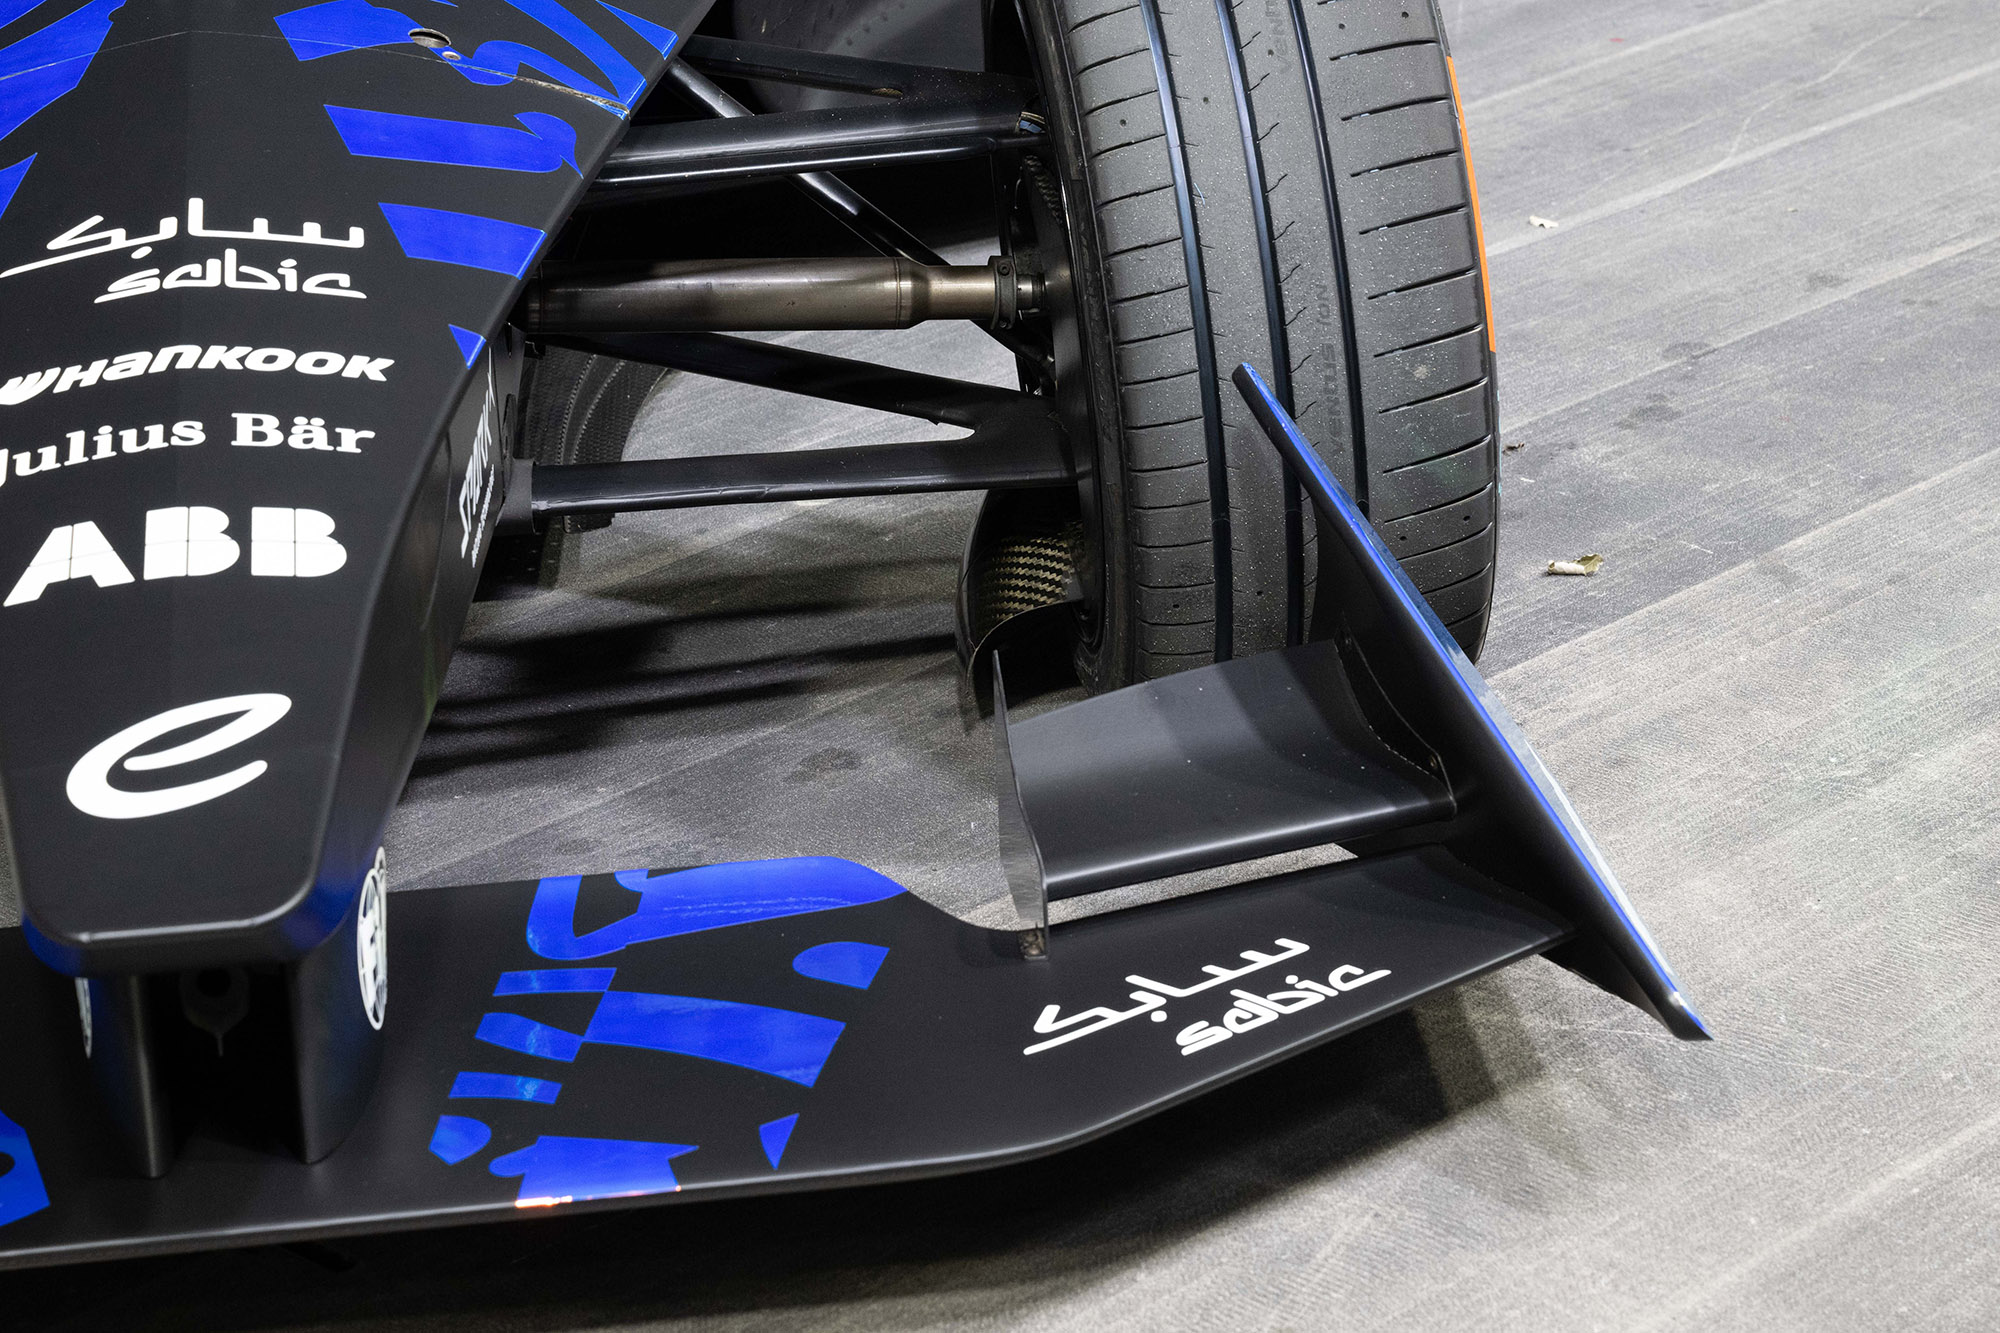 3D-printed endplates on the outboard extremities of the front wing redirect airflow around the wheels to reduce drag and improve racecar’s downforce and stability. 